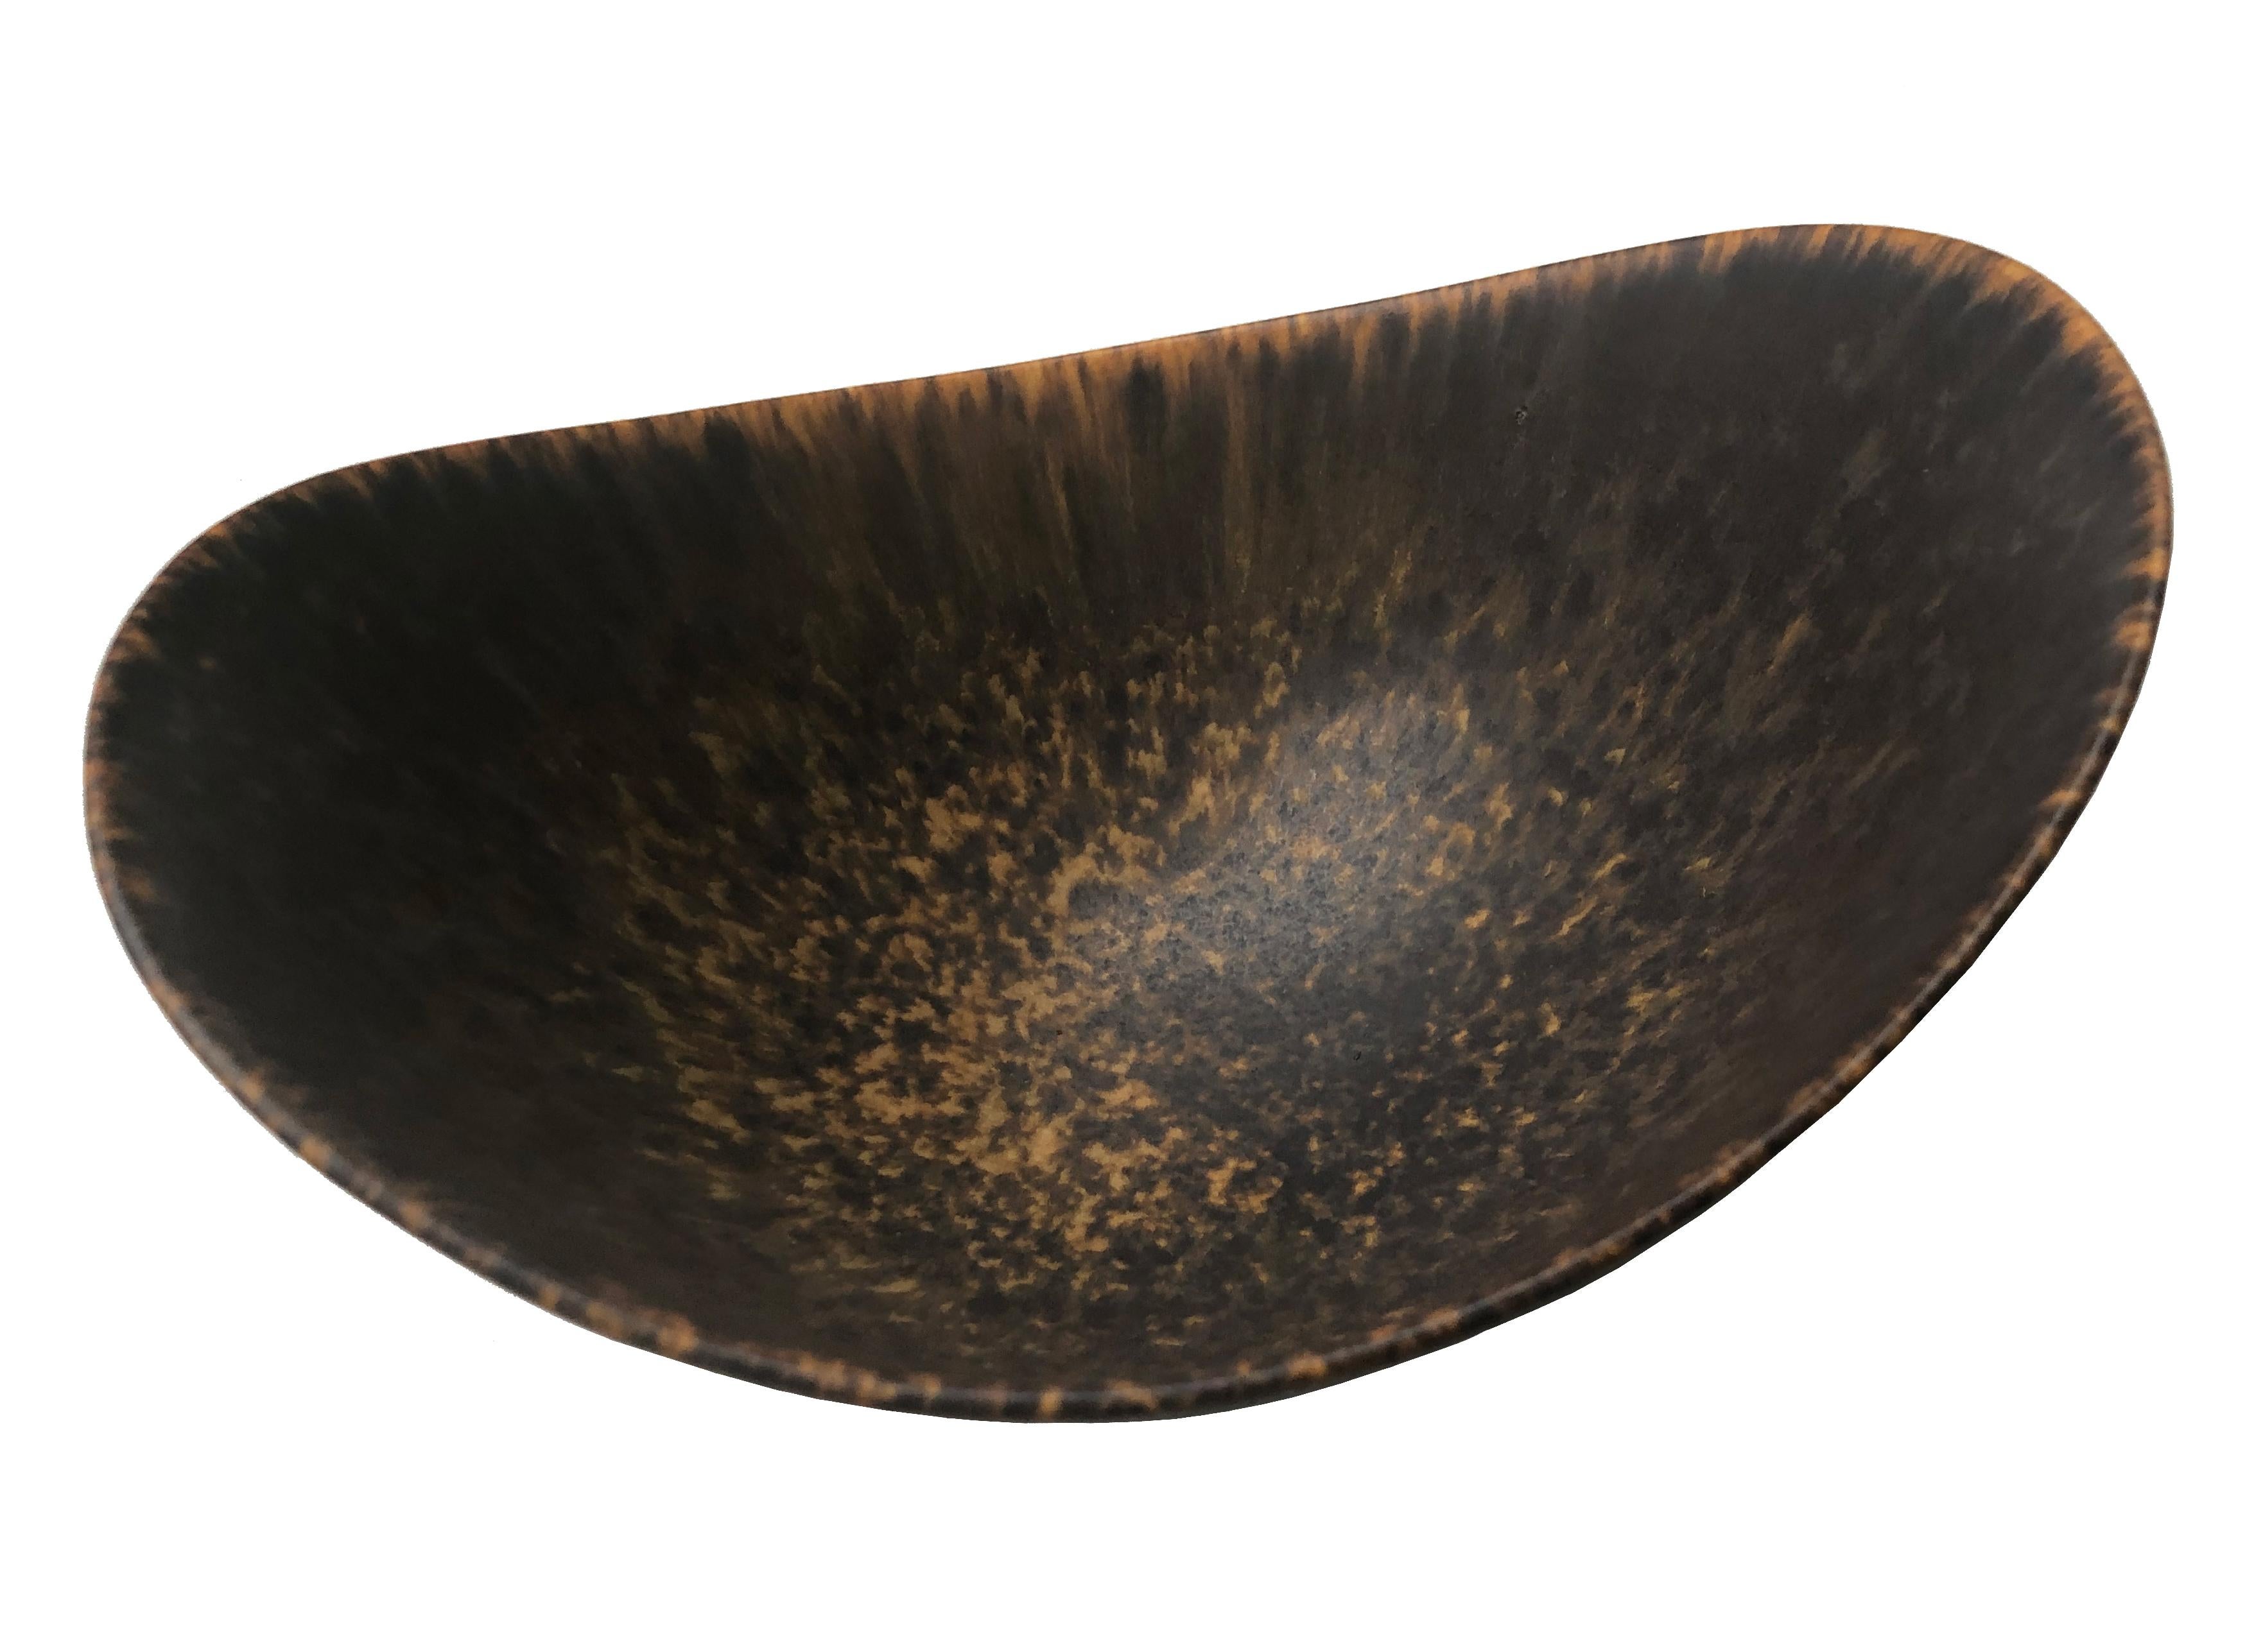 A Classic brown and beige-glazed stoneware bowl designed and produced in Sweden, 1940s. Marked as 1st quality. 
Gunnar Nylund, born in Paris in 1904 to parents engaged in sculpting and design, embarked on his own career as a designer at an early